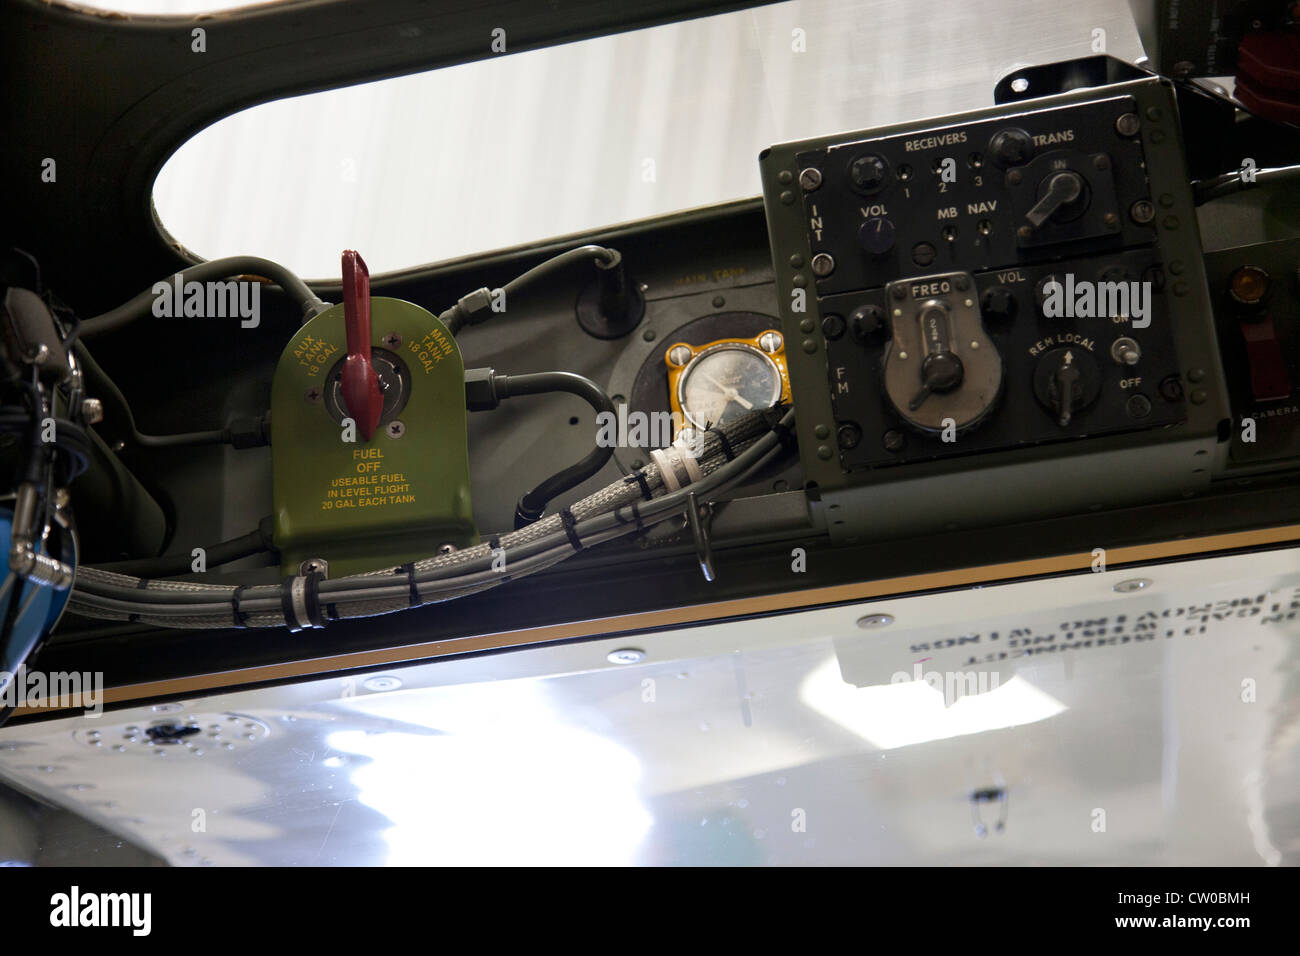 WWII communications equipment inside cockpit of modified Cessna 172 0-1 observation plane displayed in Heritage Flight Museum Stock Photo